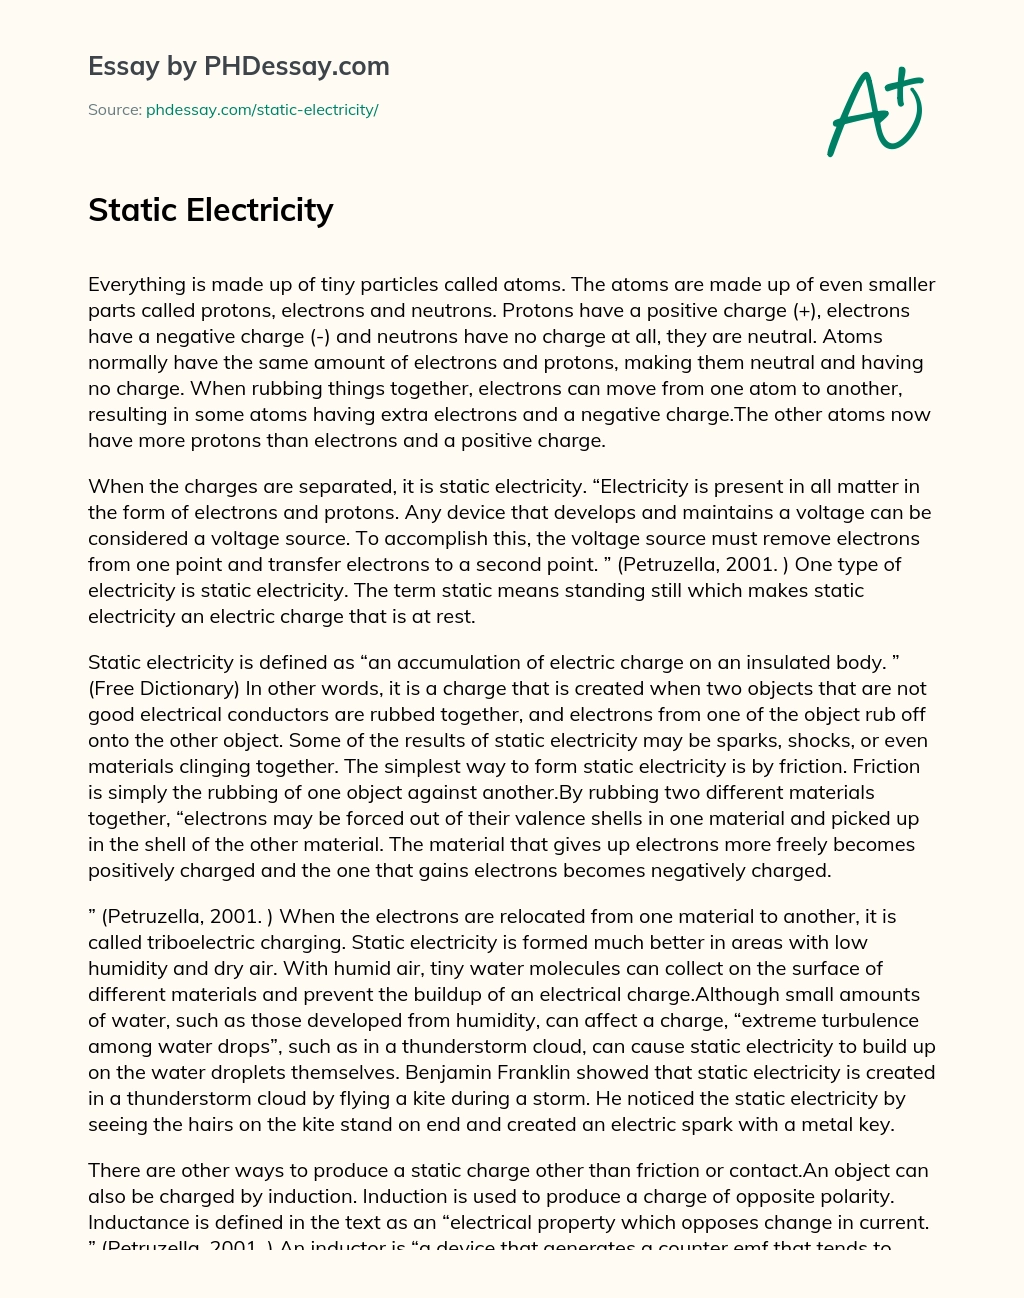 Static Electricity essay